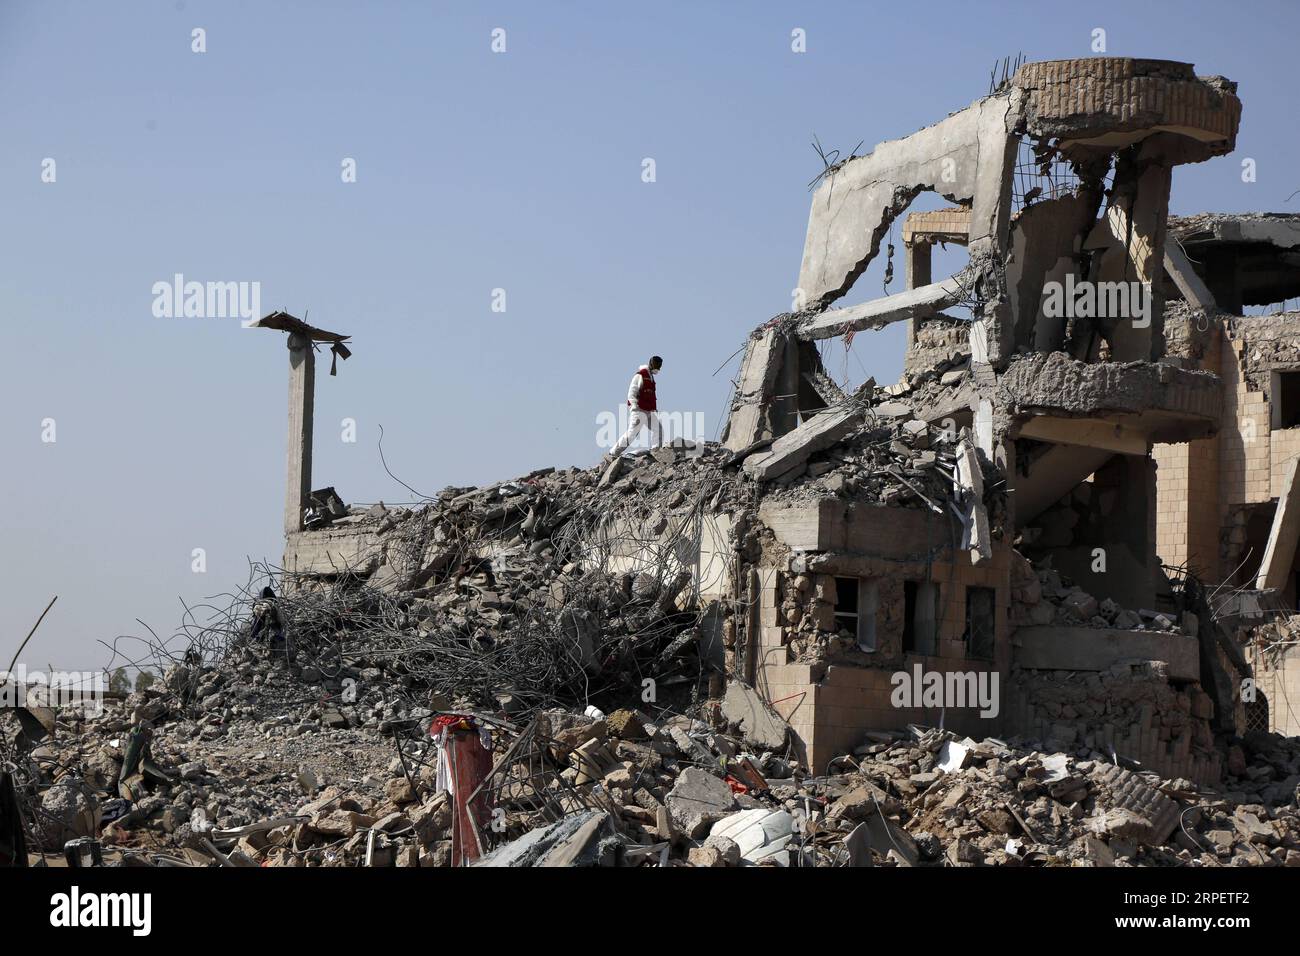 Bilder des Jahres 2019, News 09 September News Themen der Woche KW 36 News Bilder des Tages 190904 -- DHAMAR, Sept. 4, 2019 -- A rescue worker searches for victims among rubble of a building hit by airstrikes, in Dhamar province, Yemen, Sept. 4, 2019. The United Nations Special Envoy to Yemen Martin Griffiths called the deadly Saudi-led airstrike on a prison in Yemen a tragedy and said that the human cost of this war is unbearable, a UN spokesman said on Tuesday. Photo by Mohammed Mohammed/Xinhua YEMEN-DHAMAR-VICTIMS-SEARCH WangxWei PUBLICATIONxNOTxINxCHN Stock Photo